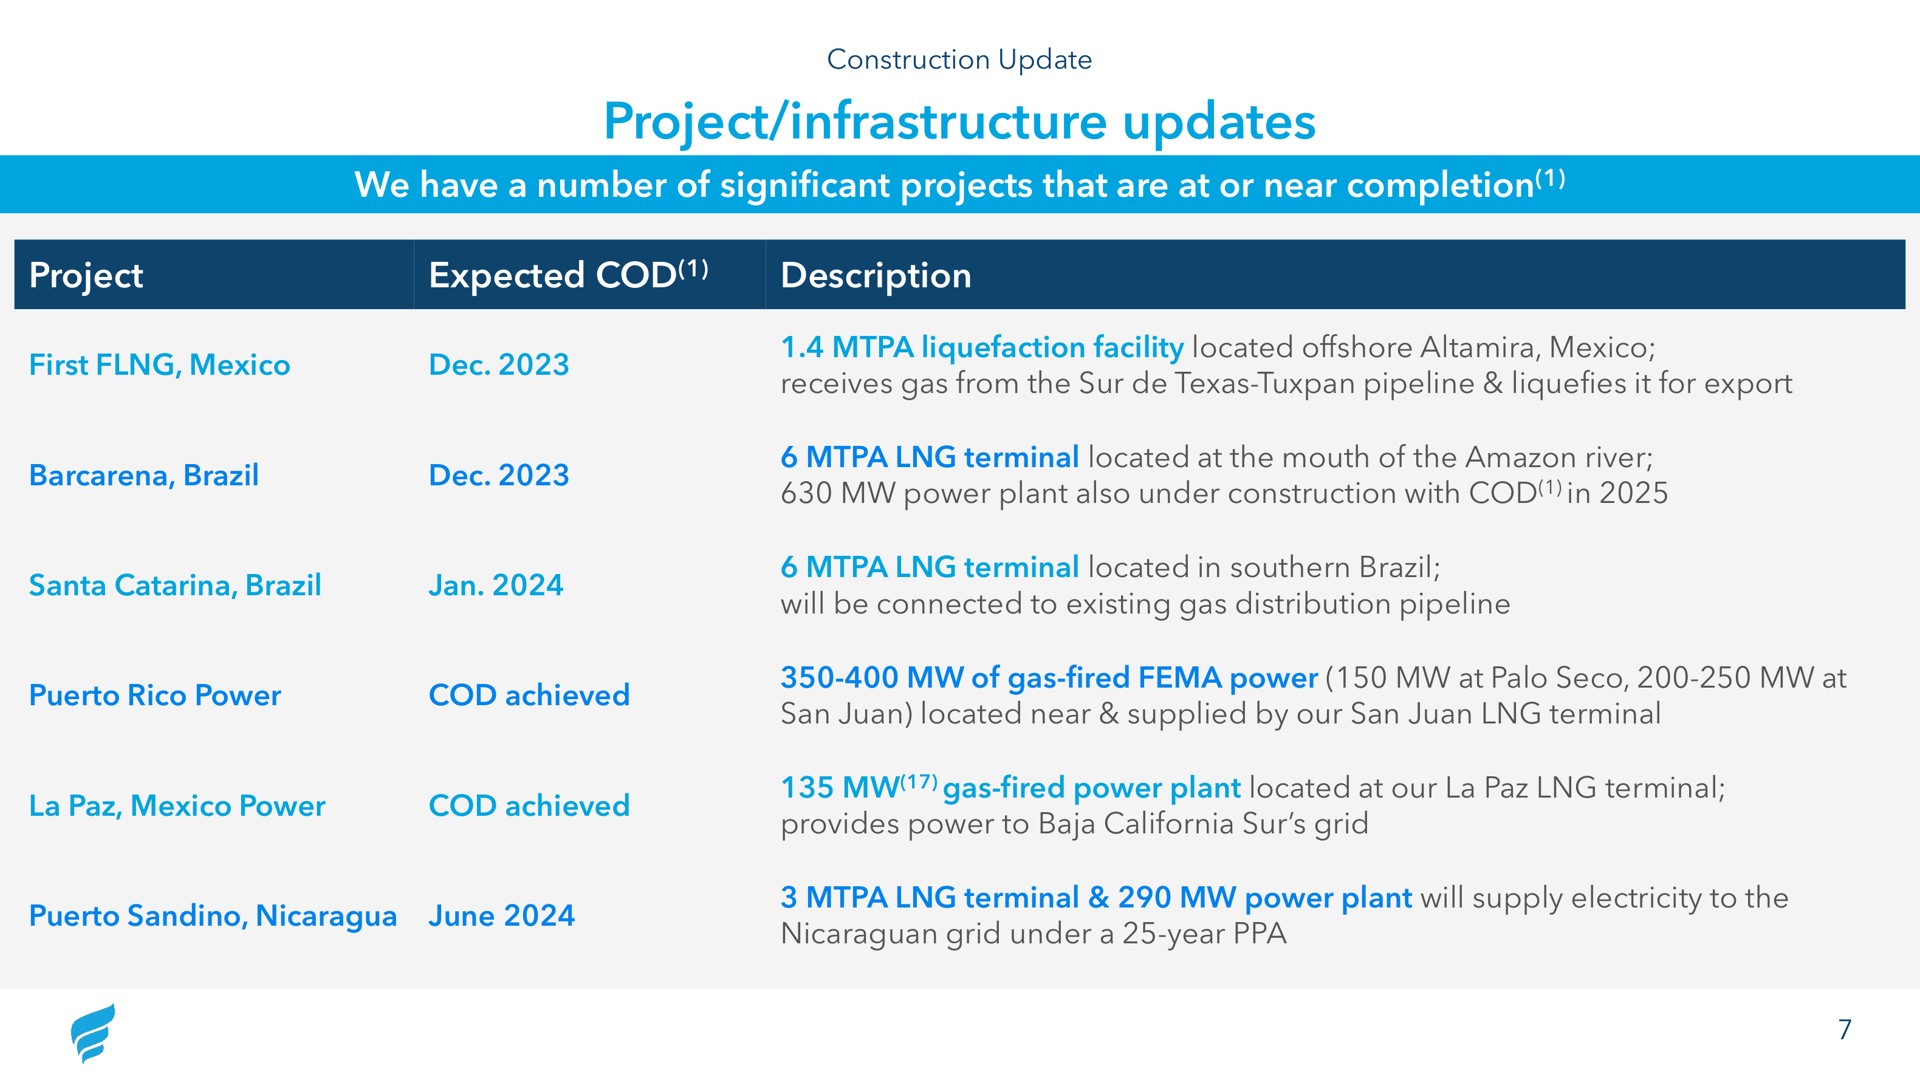 project infrastructure updates we have a number of significant projects that are at or near completion project expected cod description liquefaction facility located offshore brazil mus cates aal | NewFortress Energy